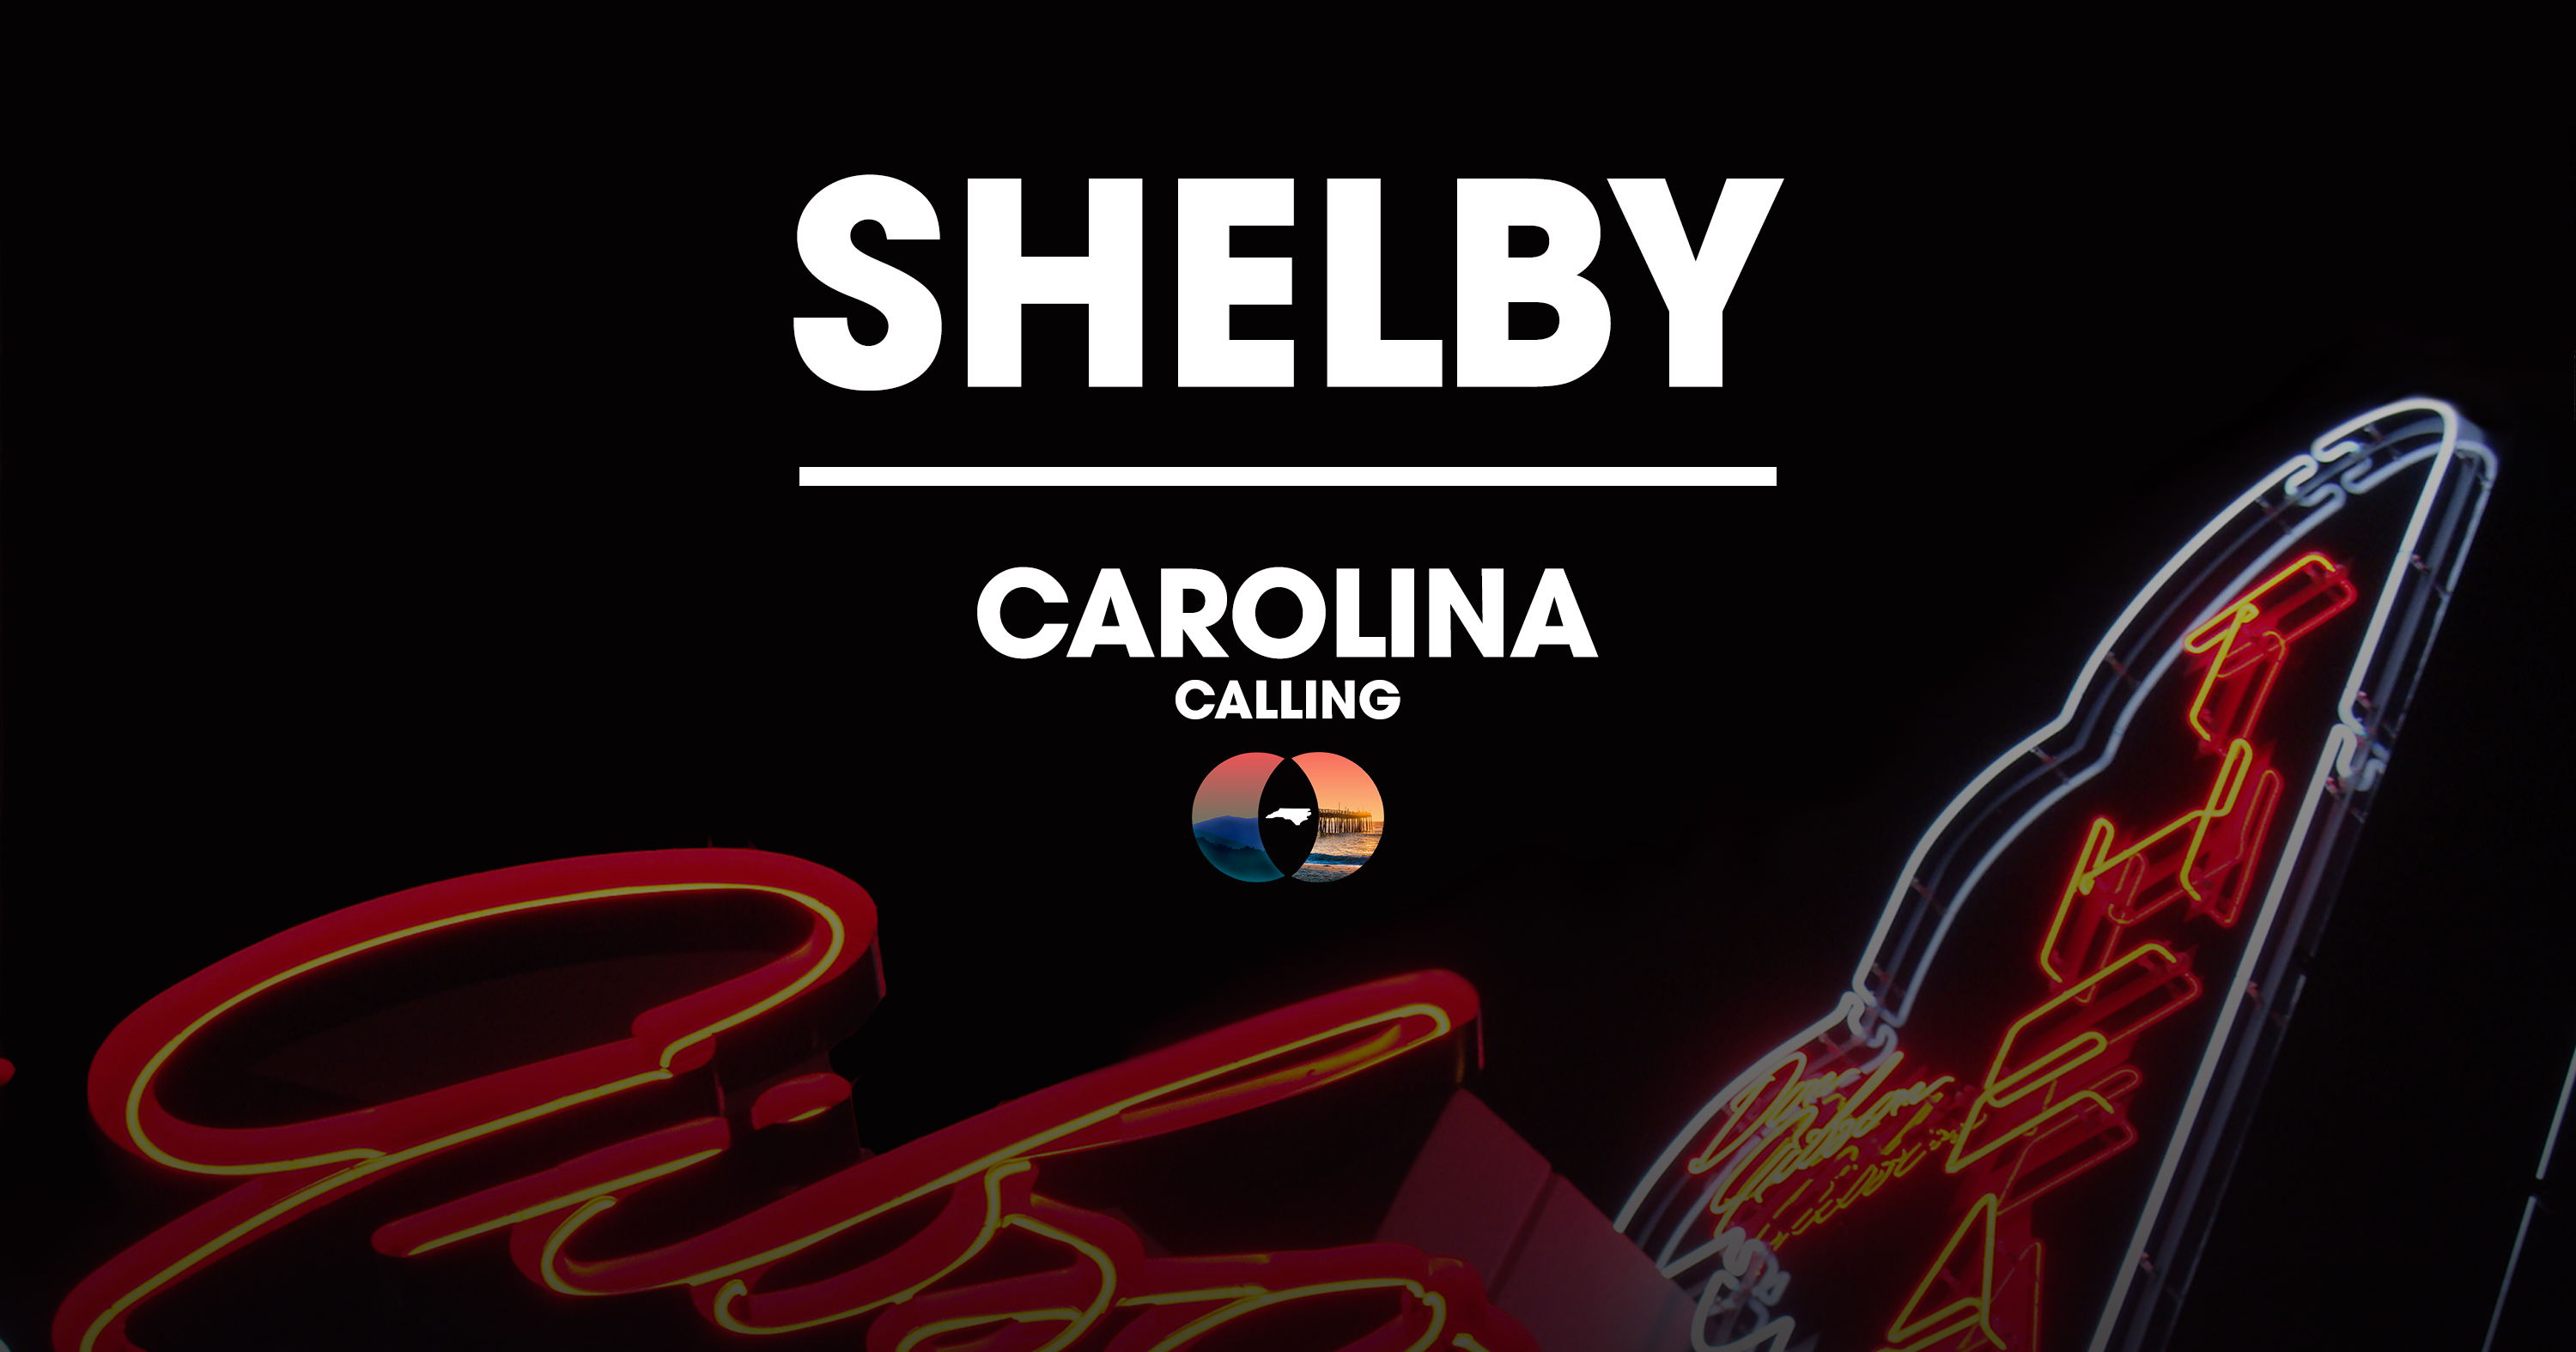 Carolina Calling, Shelby: Local Legends Breathe New Life Into Small Town